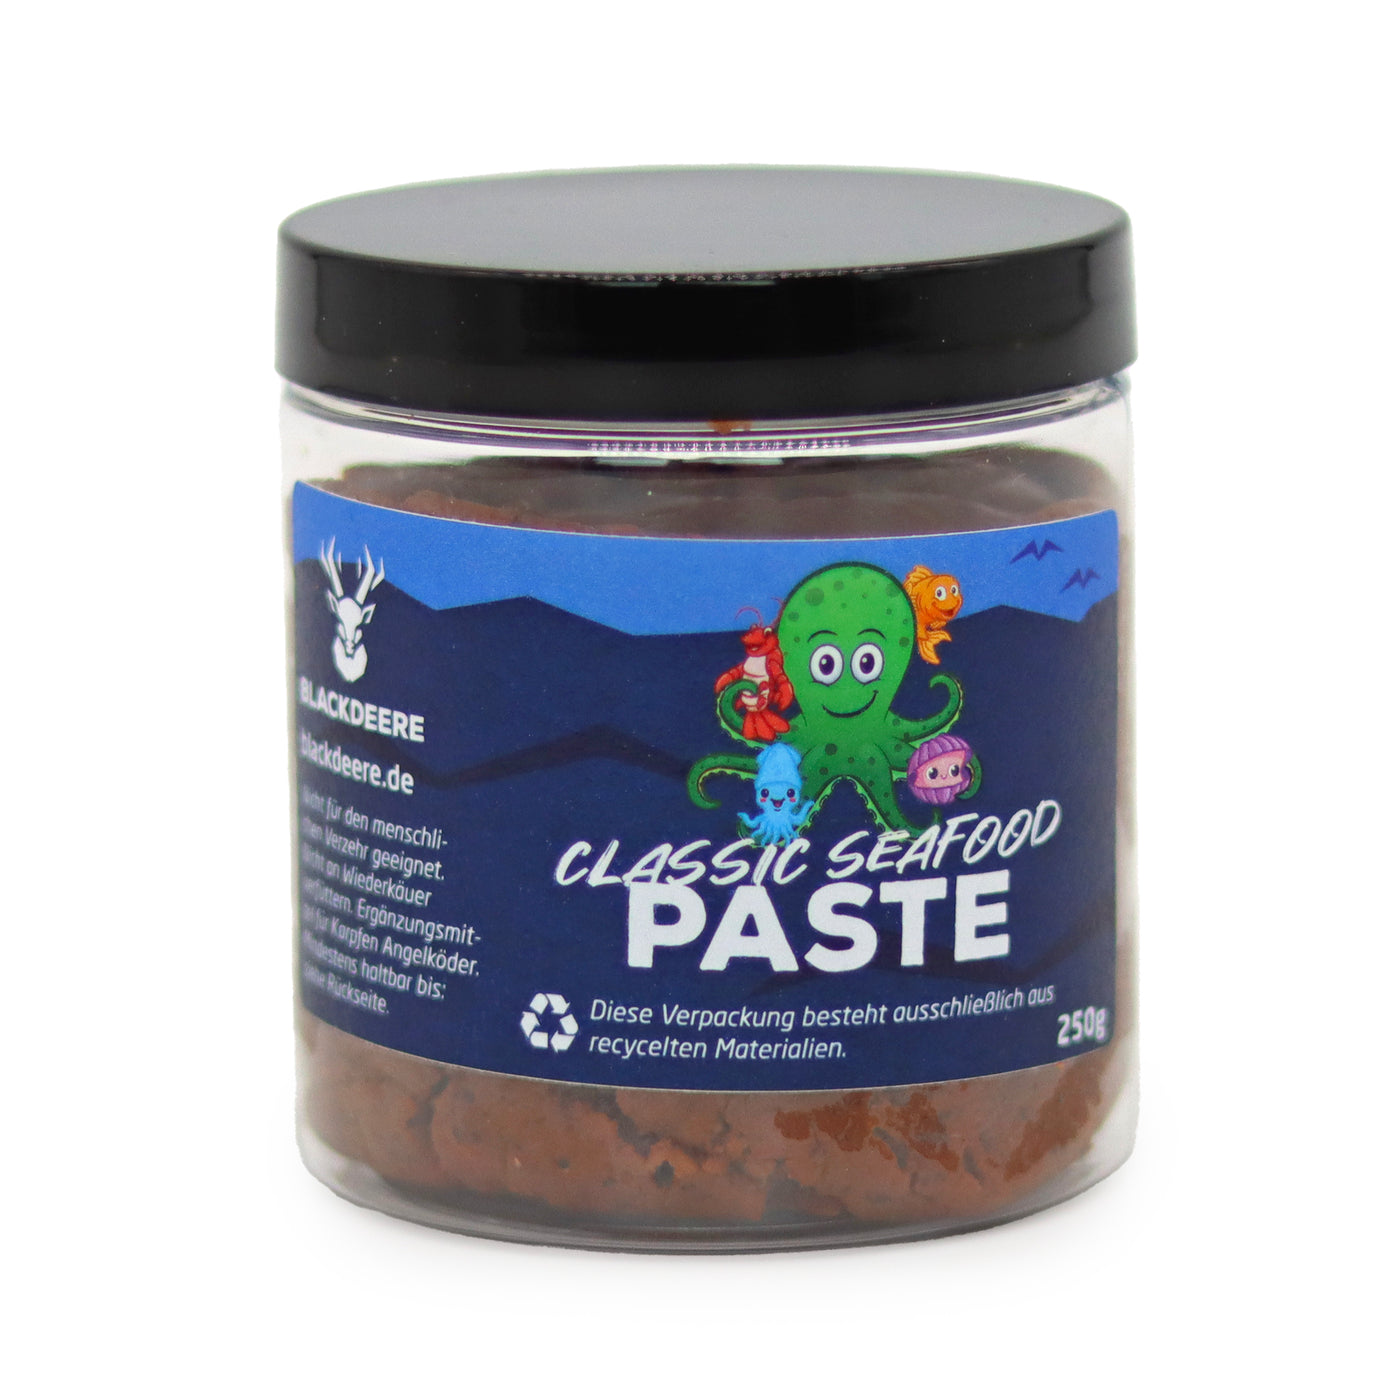 Classic Seafood Paste